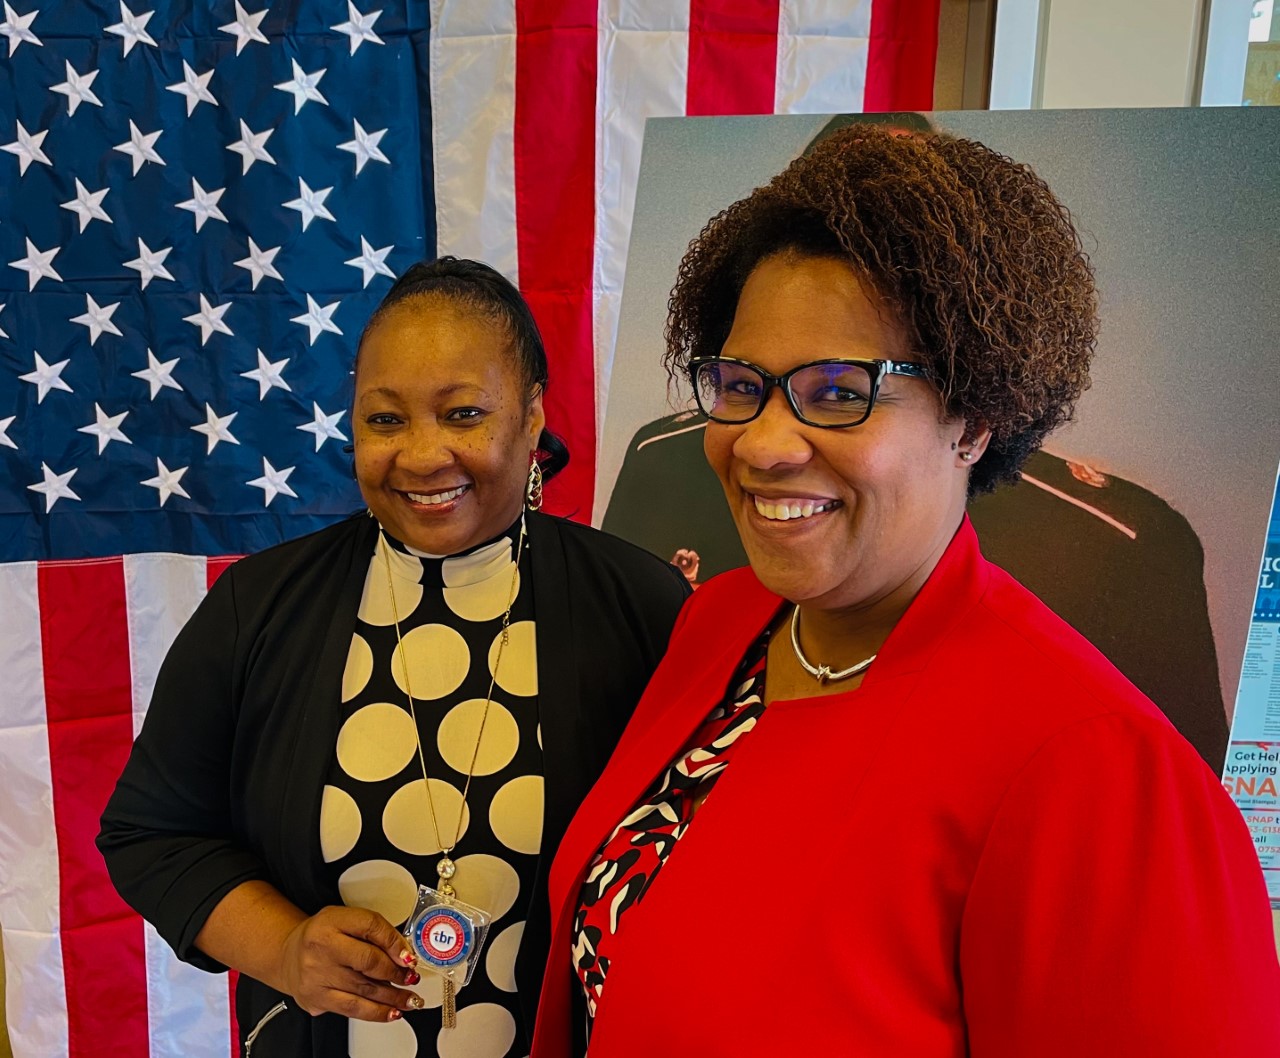 Nashville State President Dr. Shanna L. Jackson presents Dawne Moore, a retired U.S. Army Master Sergeant and current student success veteran advisor, with the Chancellor's Commendation for Military Veterans during a Veterans Day celebration at the Clarksville campus on Wilma Rudolph Blvd.